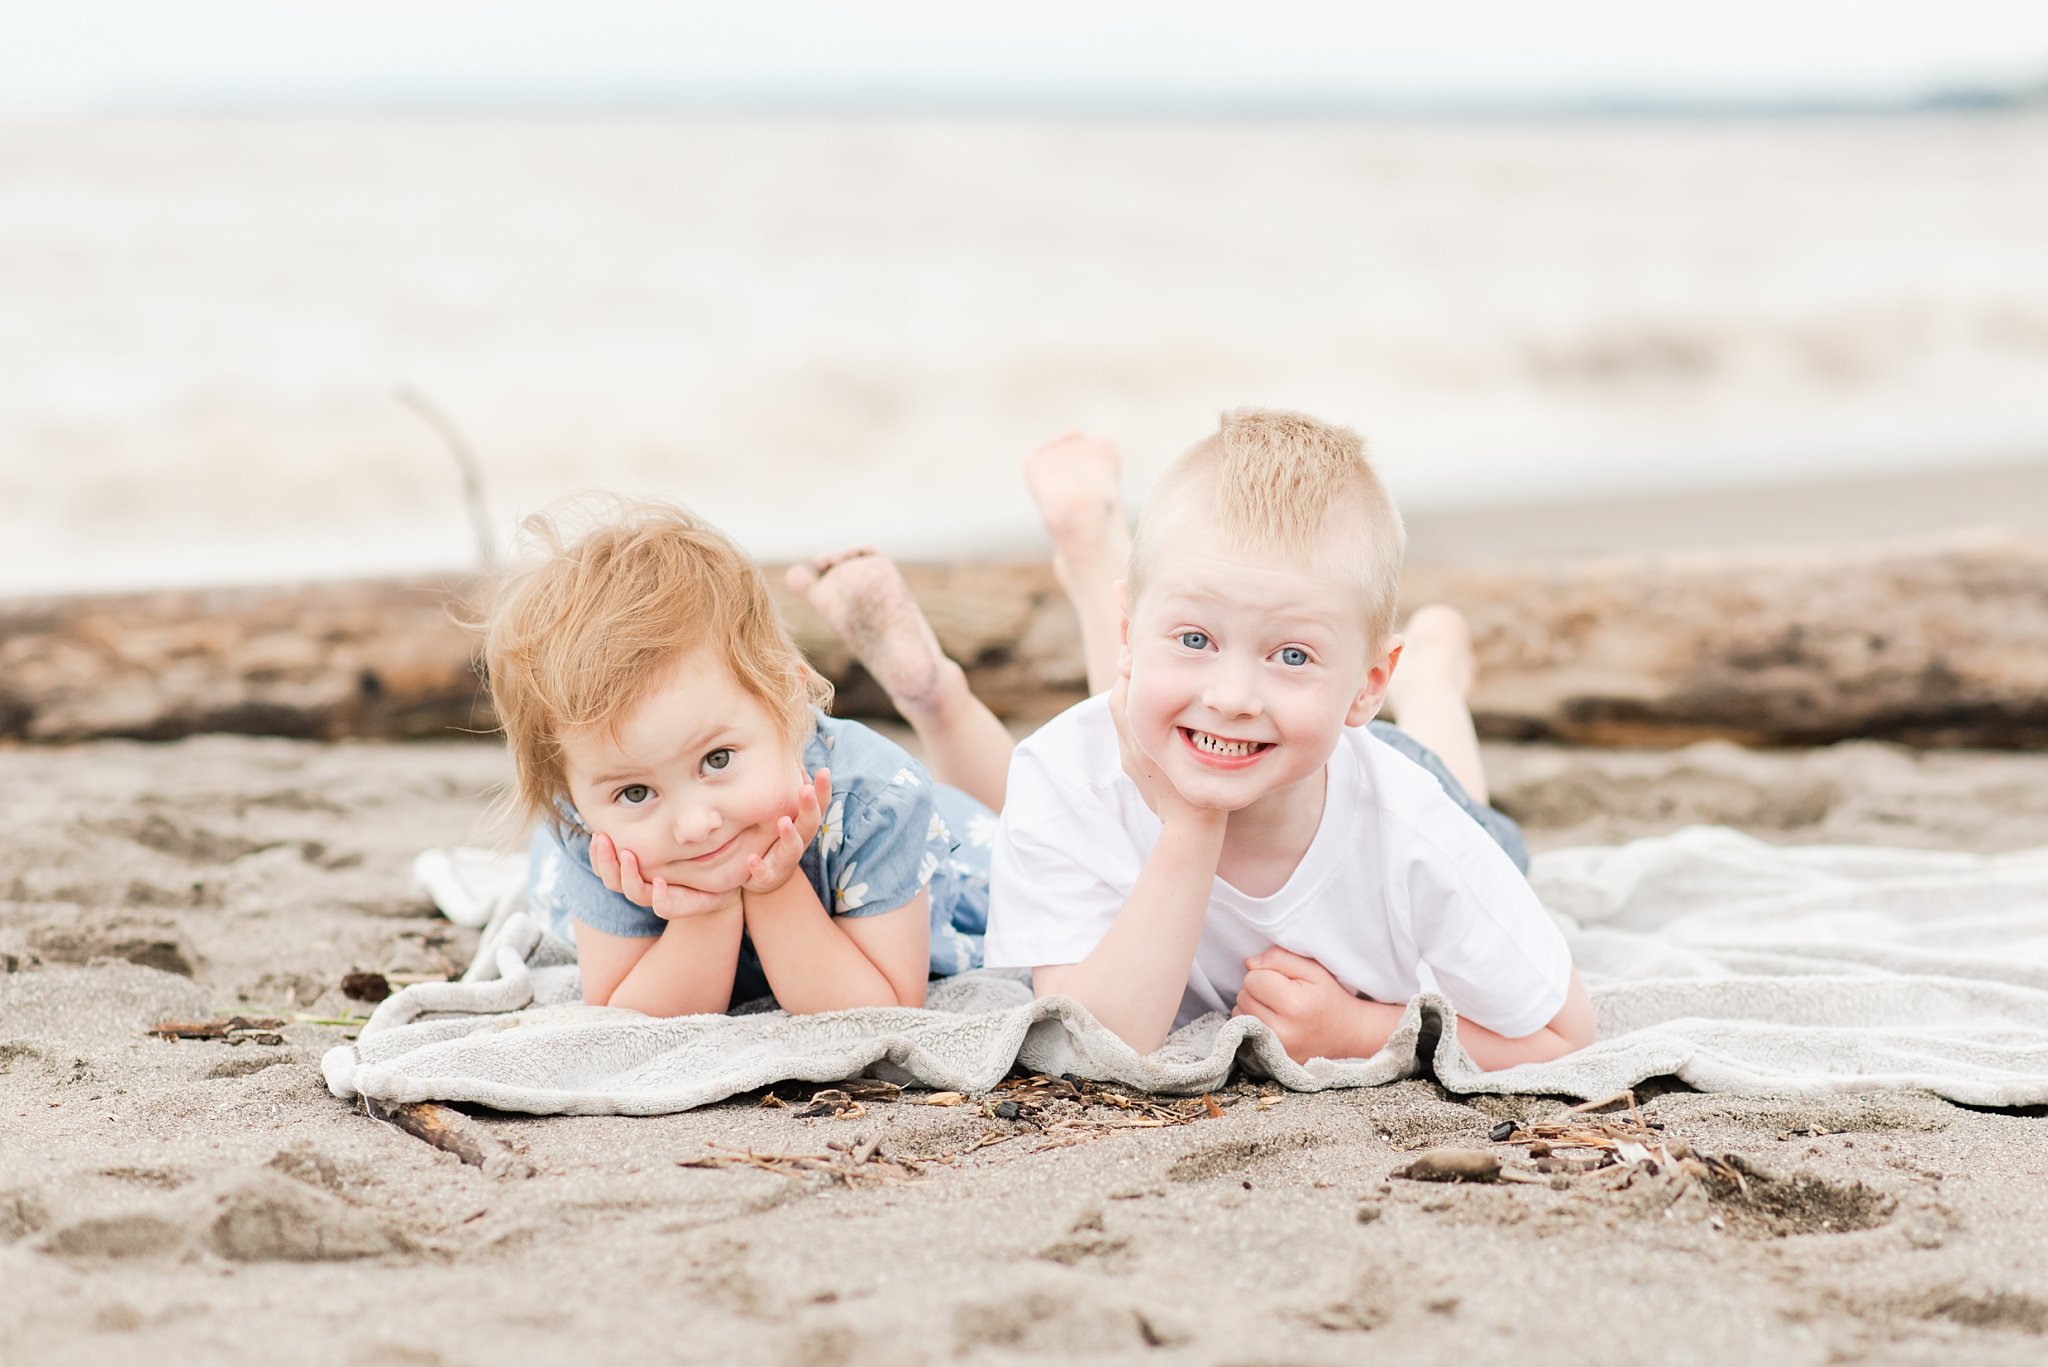 family photography london ontario. a little boy and a little girl lay on their stomachs with their chins in their hands, on a blanket at the beach. they're both blonde, he is wearing a white shirt and she is wearing a blue and white dress.